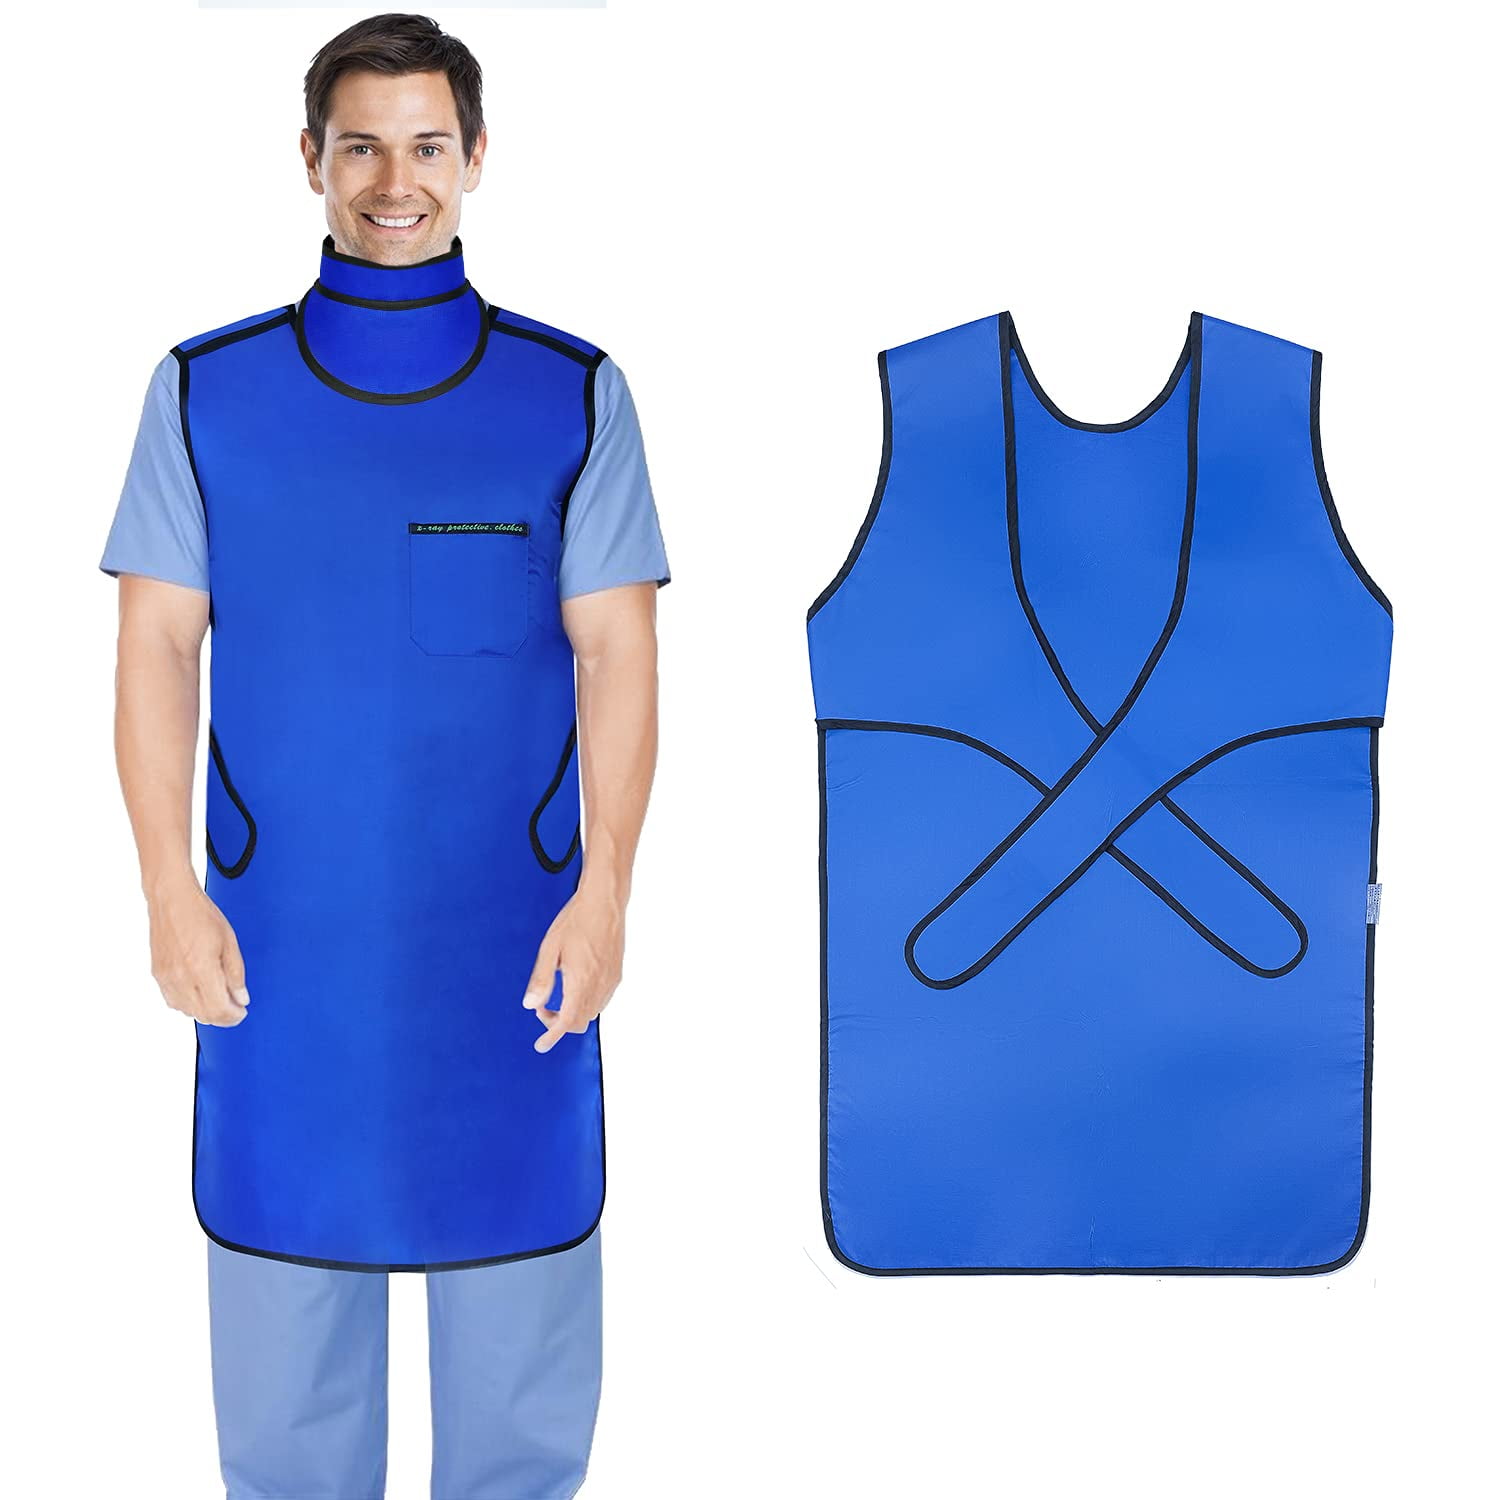 Lightweight Upgrade 0.5mmpb Xray Lead Clothes with Thyroid Shield Collar,Dental Lab Apron,Radiation Protection 